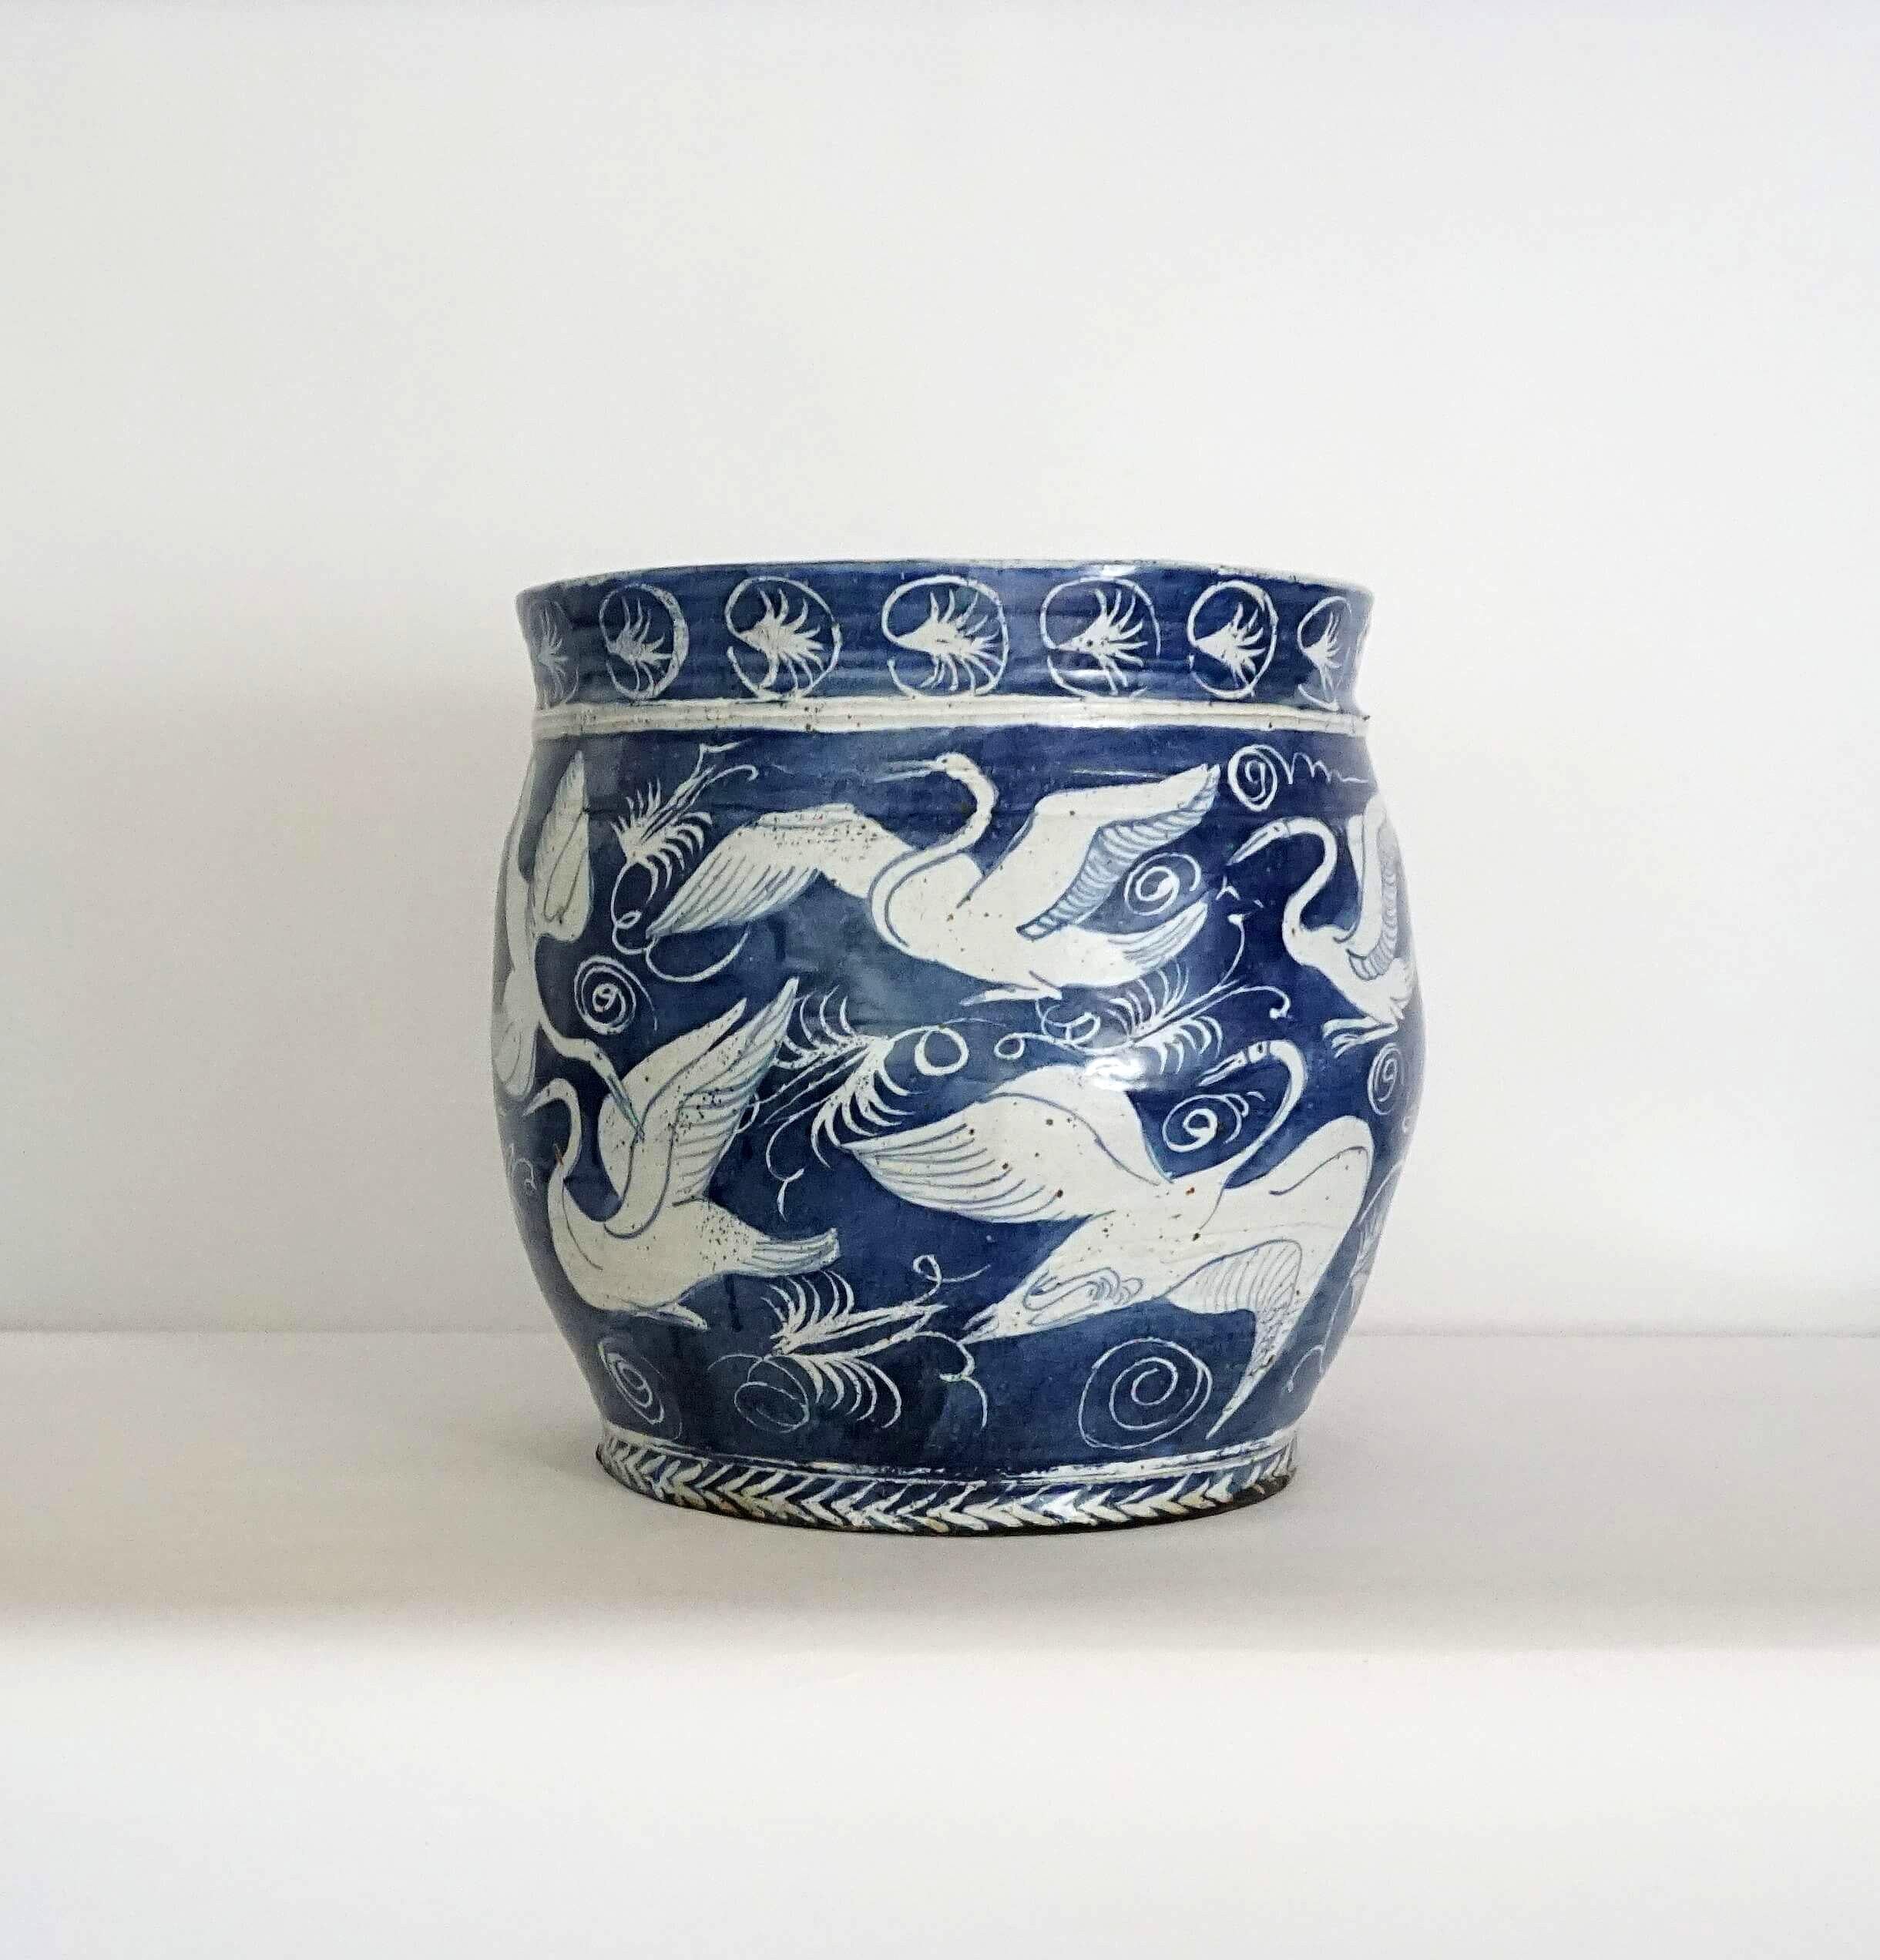 A very chic and distinctive Asian fish-bowl form planter or jardinière of large scale by late New York master potter and sculptor M. Jay Lindsay having cobalt blue and white wax resistant glaze, the gently flared rim banded with an abstract circular